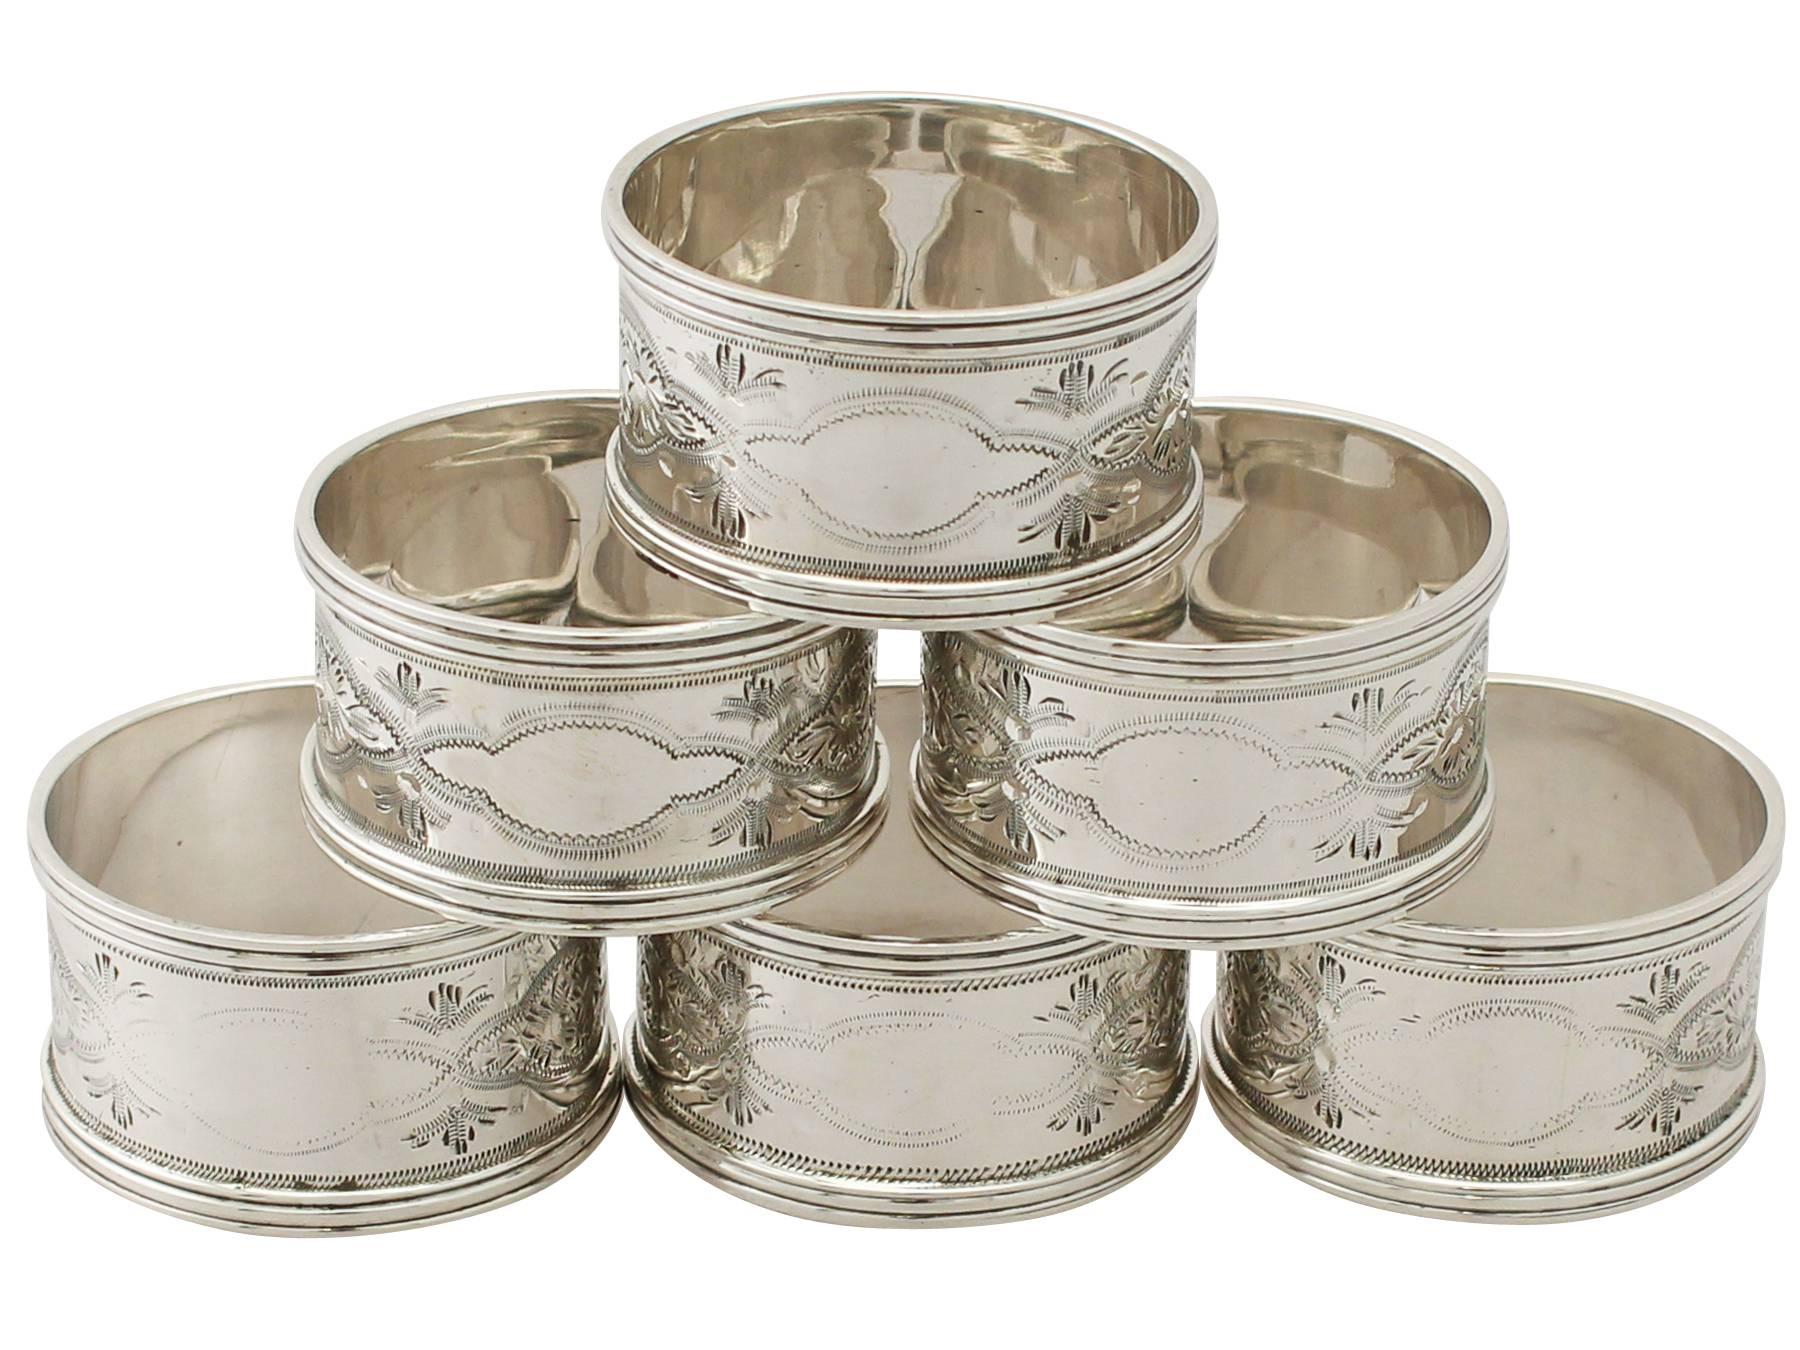 An exceptional, fine and impressive set of six antique George V English sterling silver napkin rings - boxed; an addition to our dining silverware collection

The surface of each napkin ring is encircled with impressive bright cut engraved